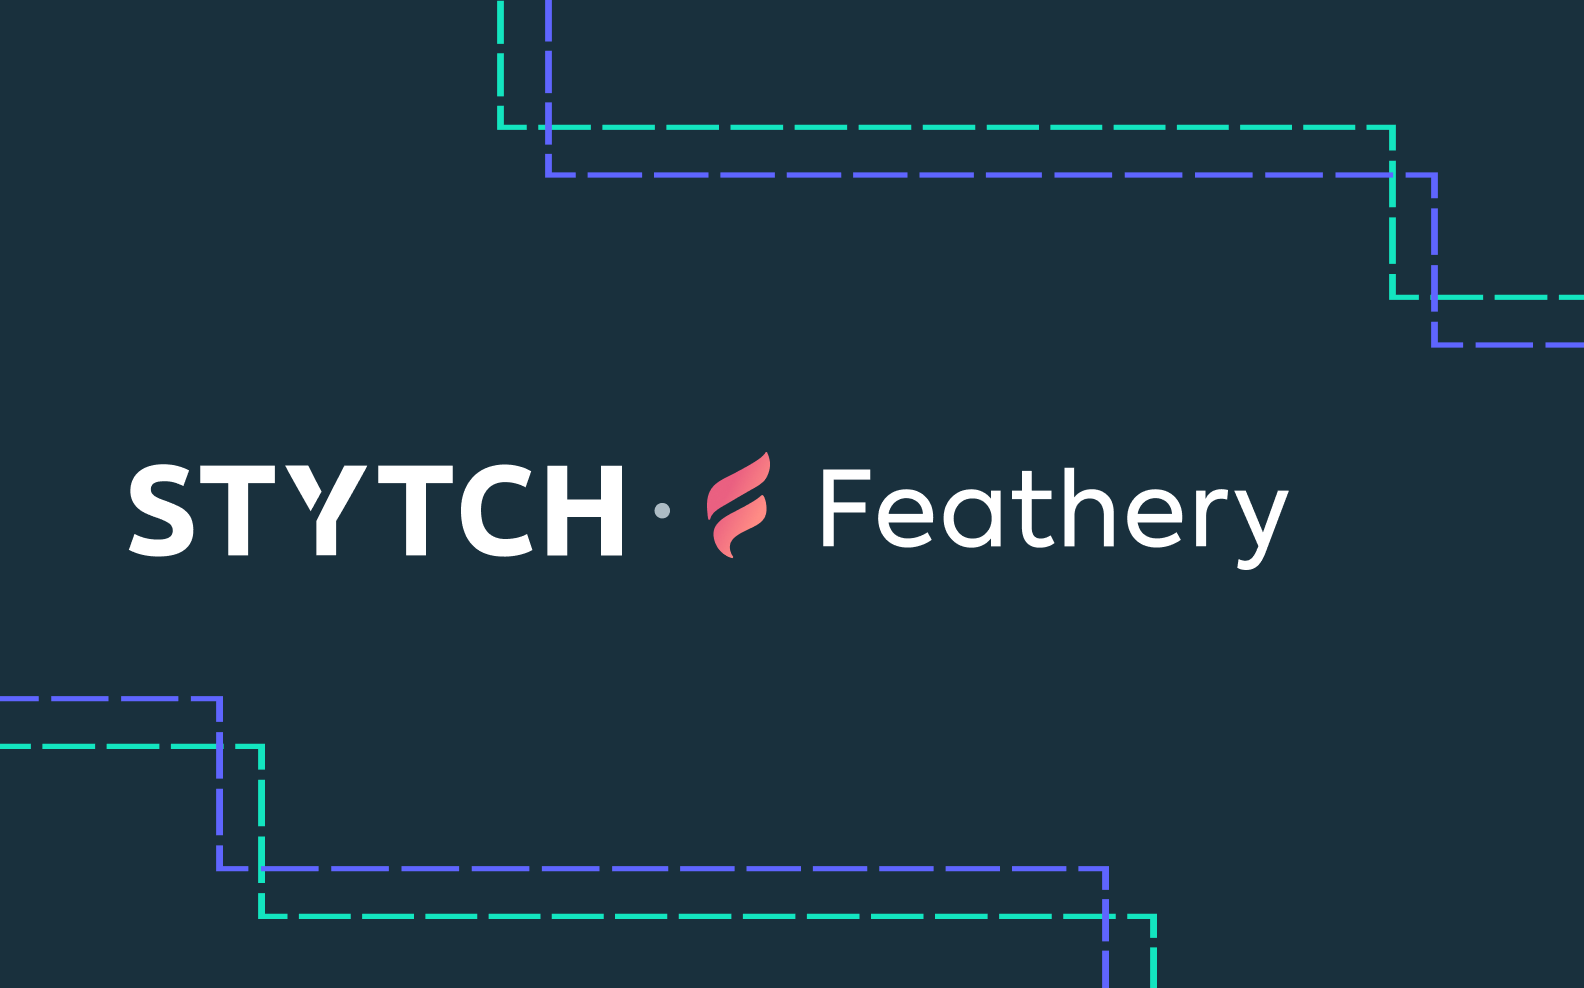 The words "Stytch" and "Feathery" on a dark green background with light green stitched lines in the corners